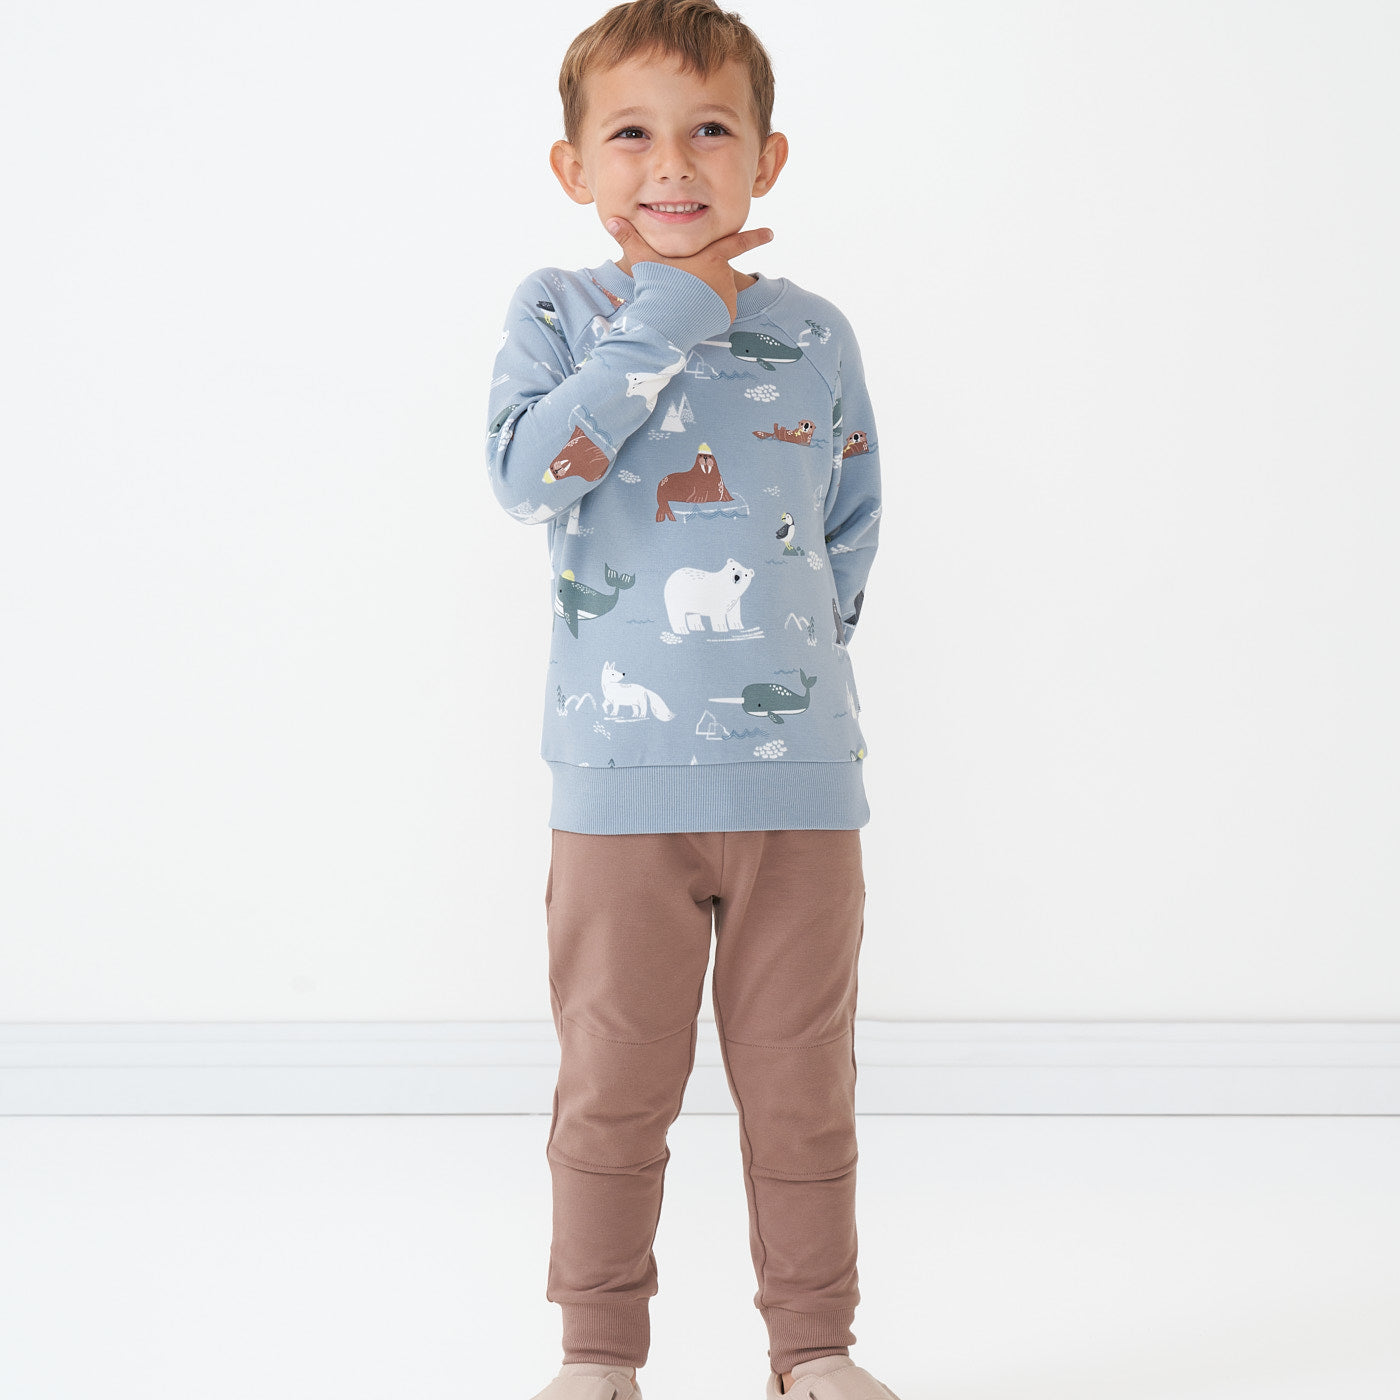 Child with his hand under his chin wearing an Arctic Animals printed crewneck sweatshirt and coordinating joggers